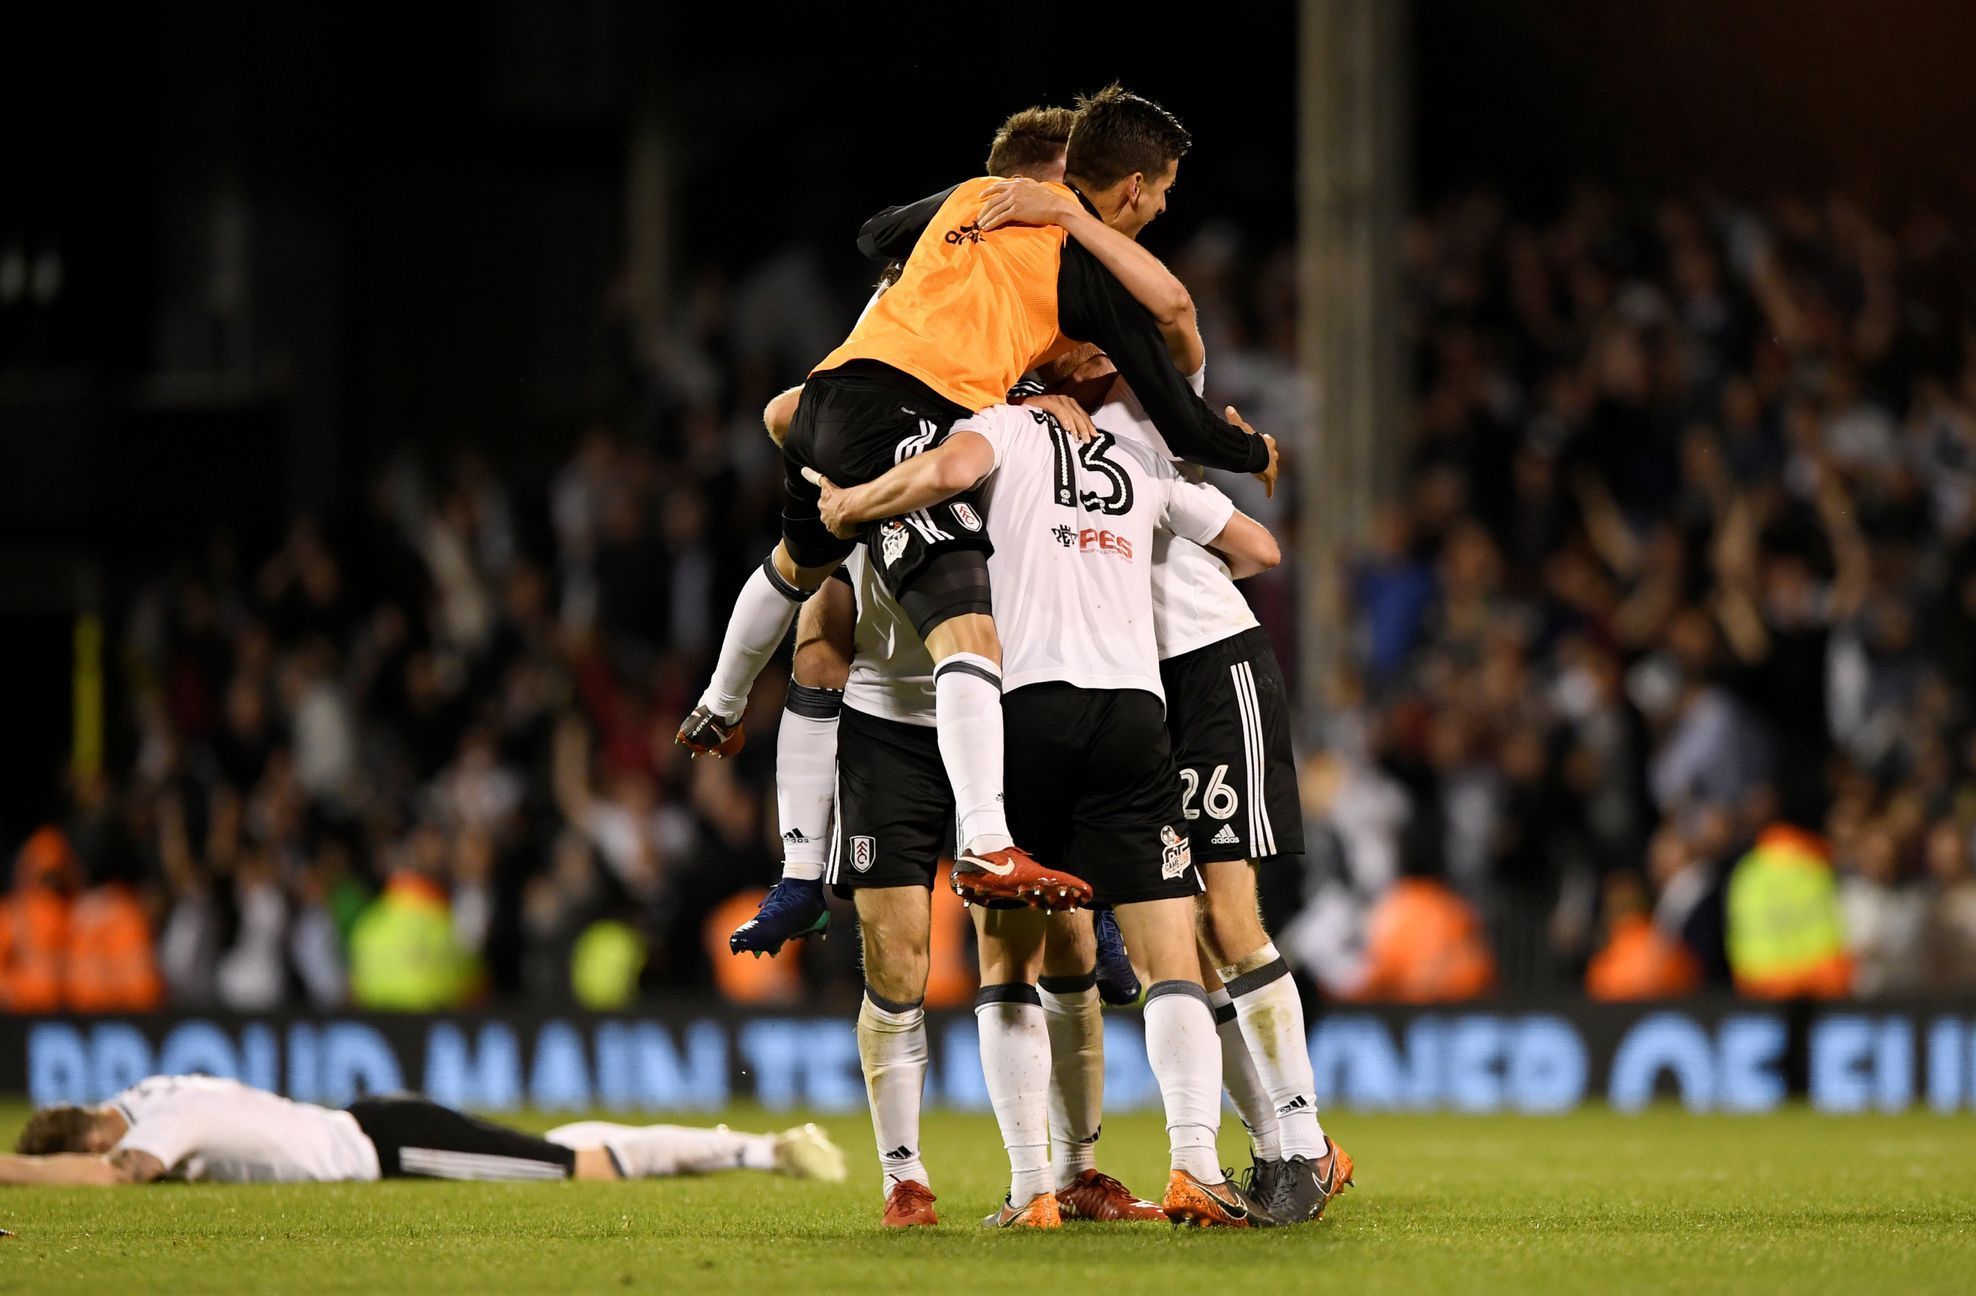 Fulham vs. Derby County